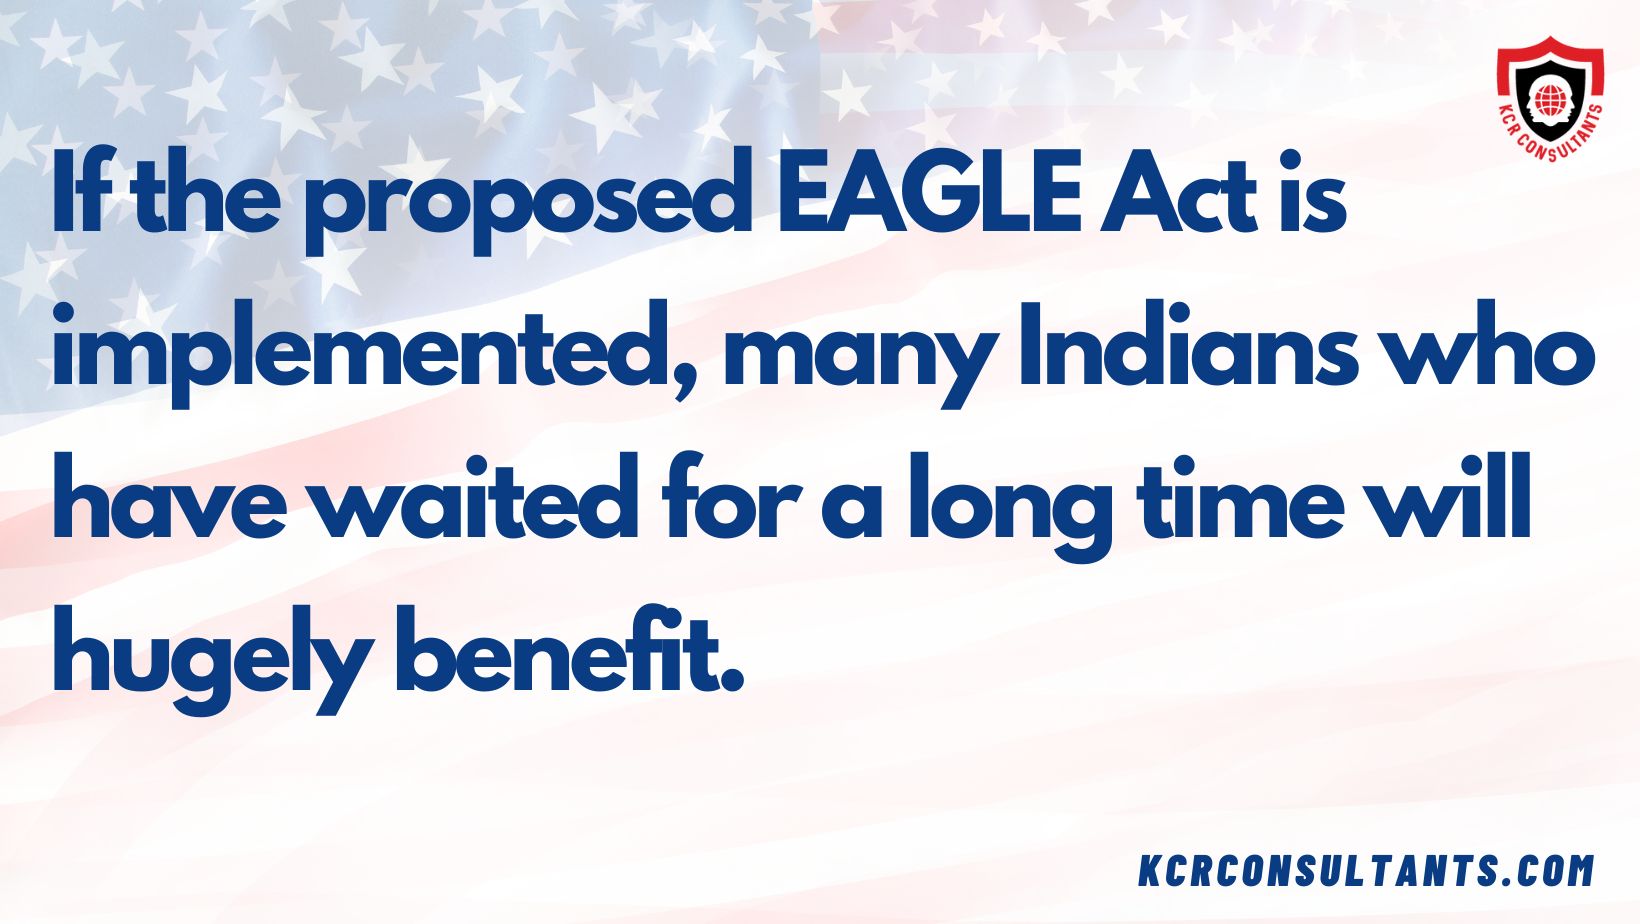 United States of America, the land of immigrants and the EAGLE Act